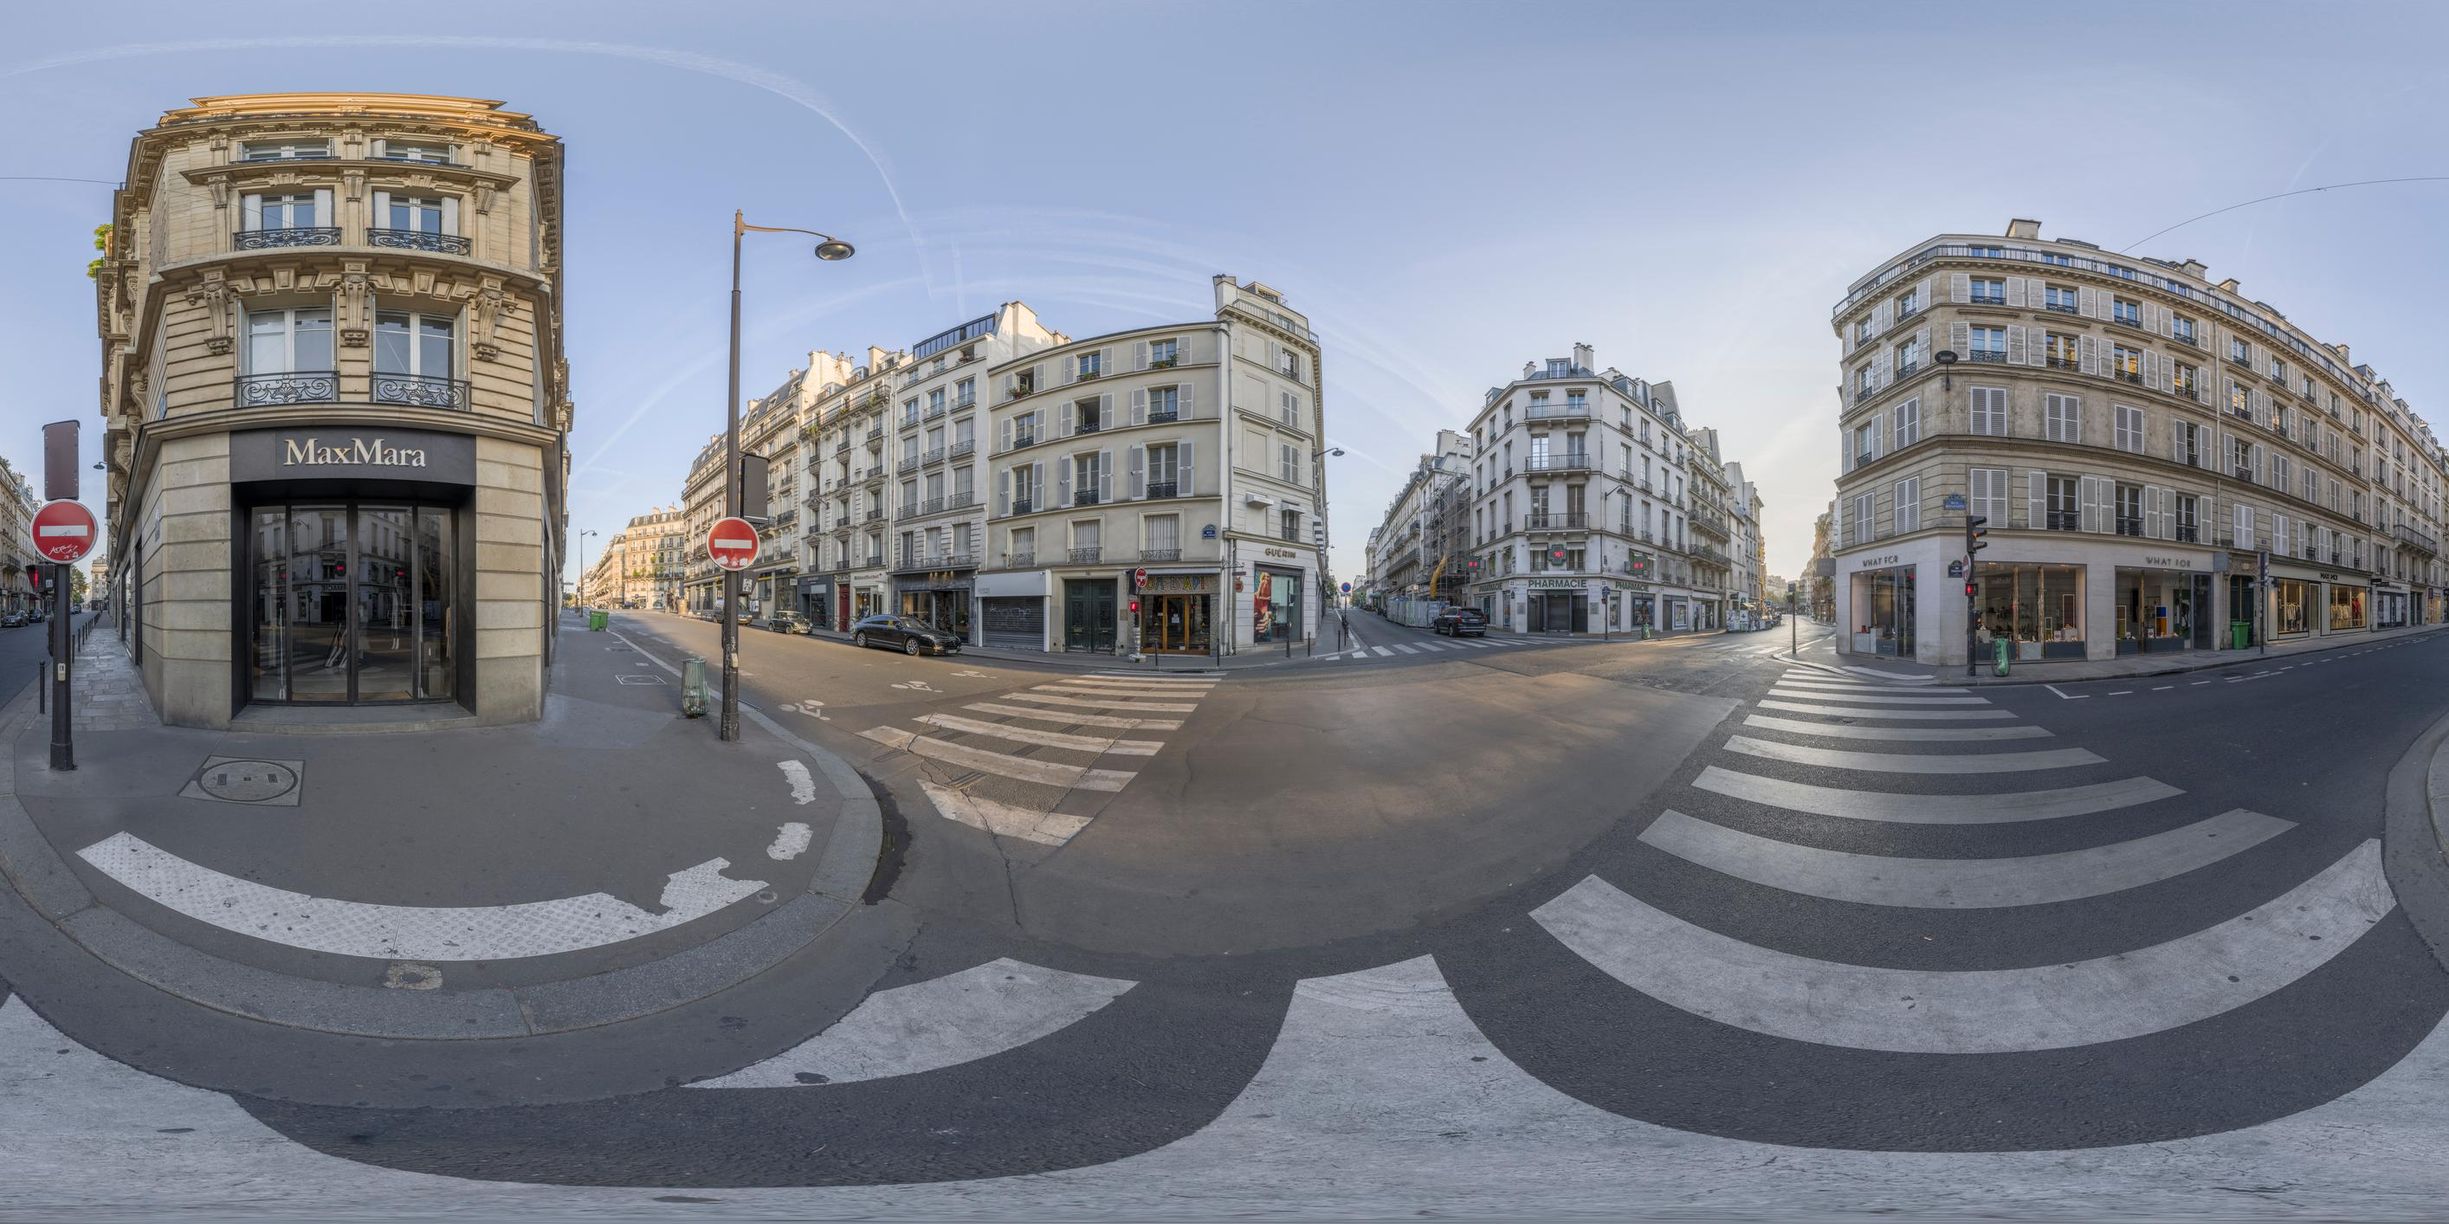 this is a panoramic image of paris buildings and people at the intersection of a busy street